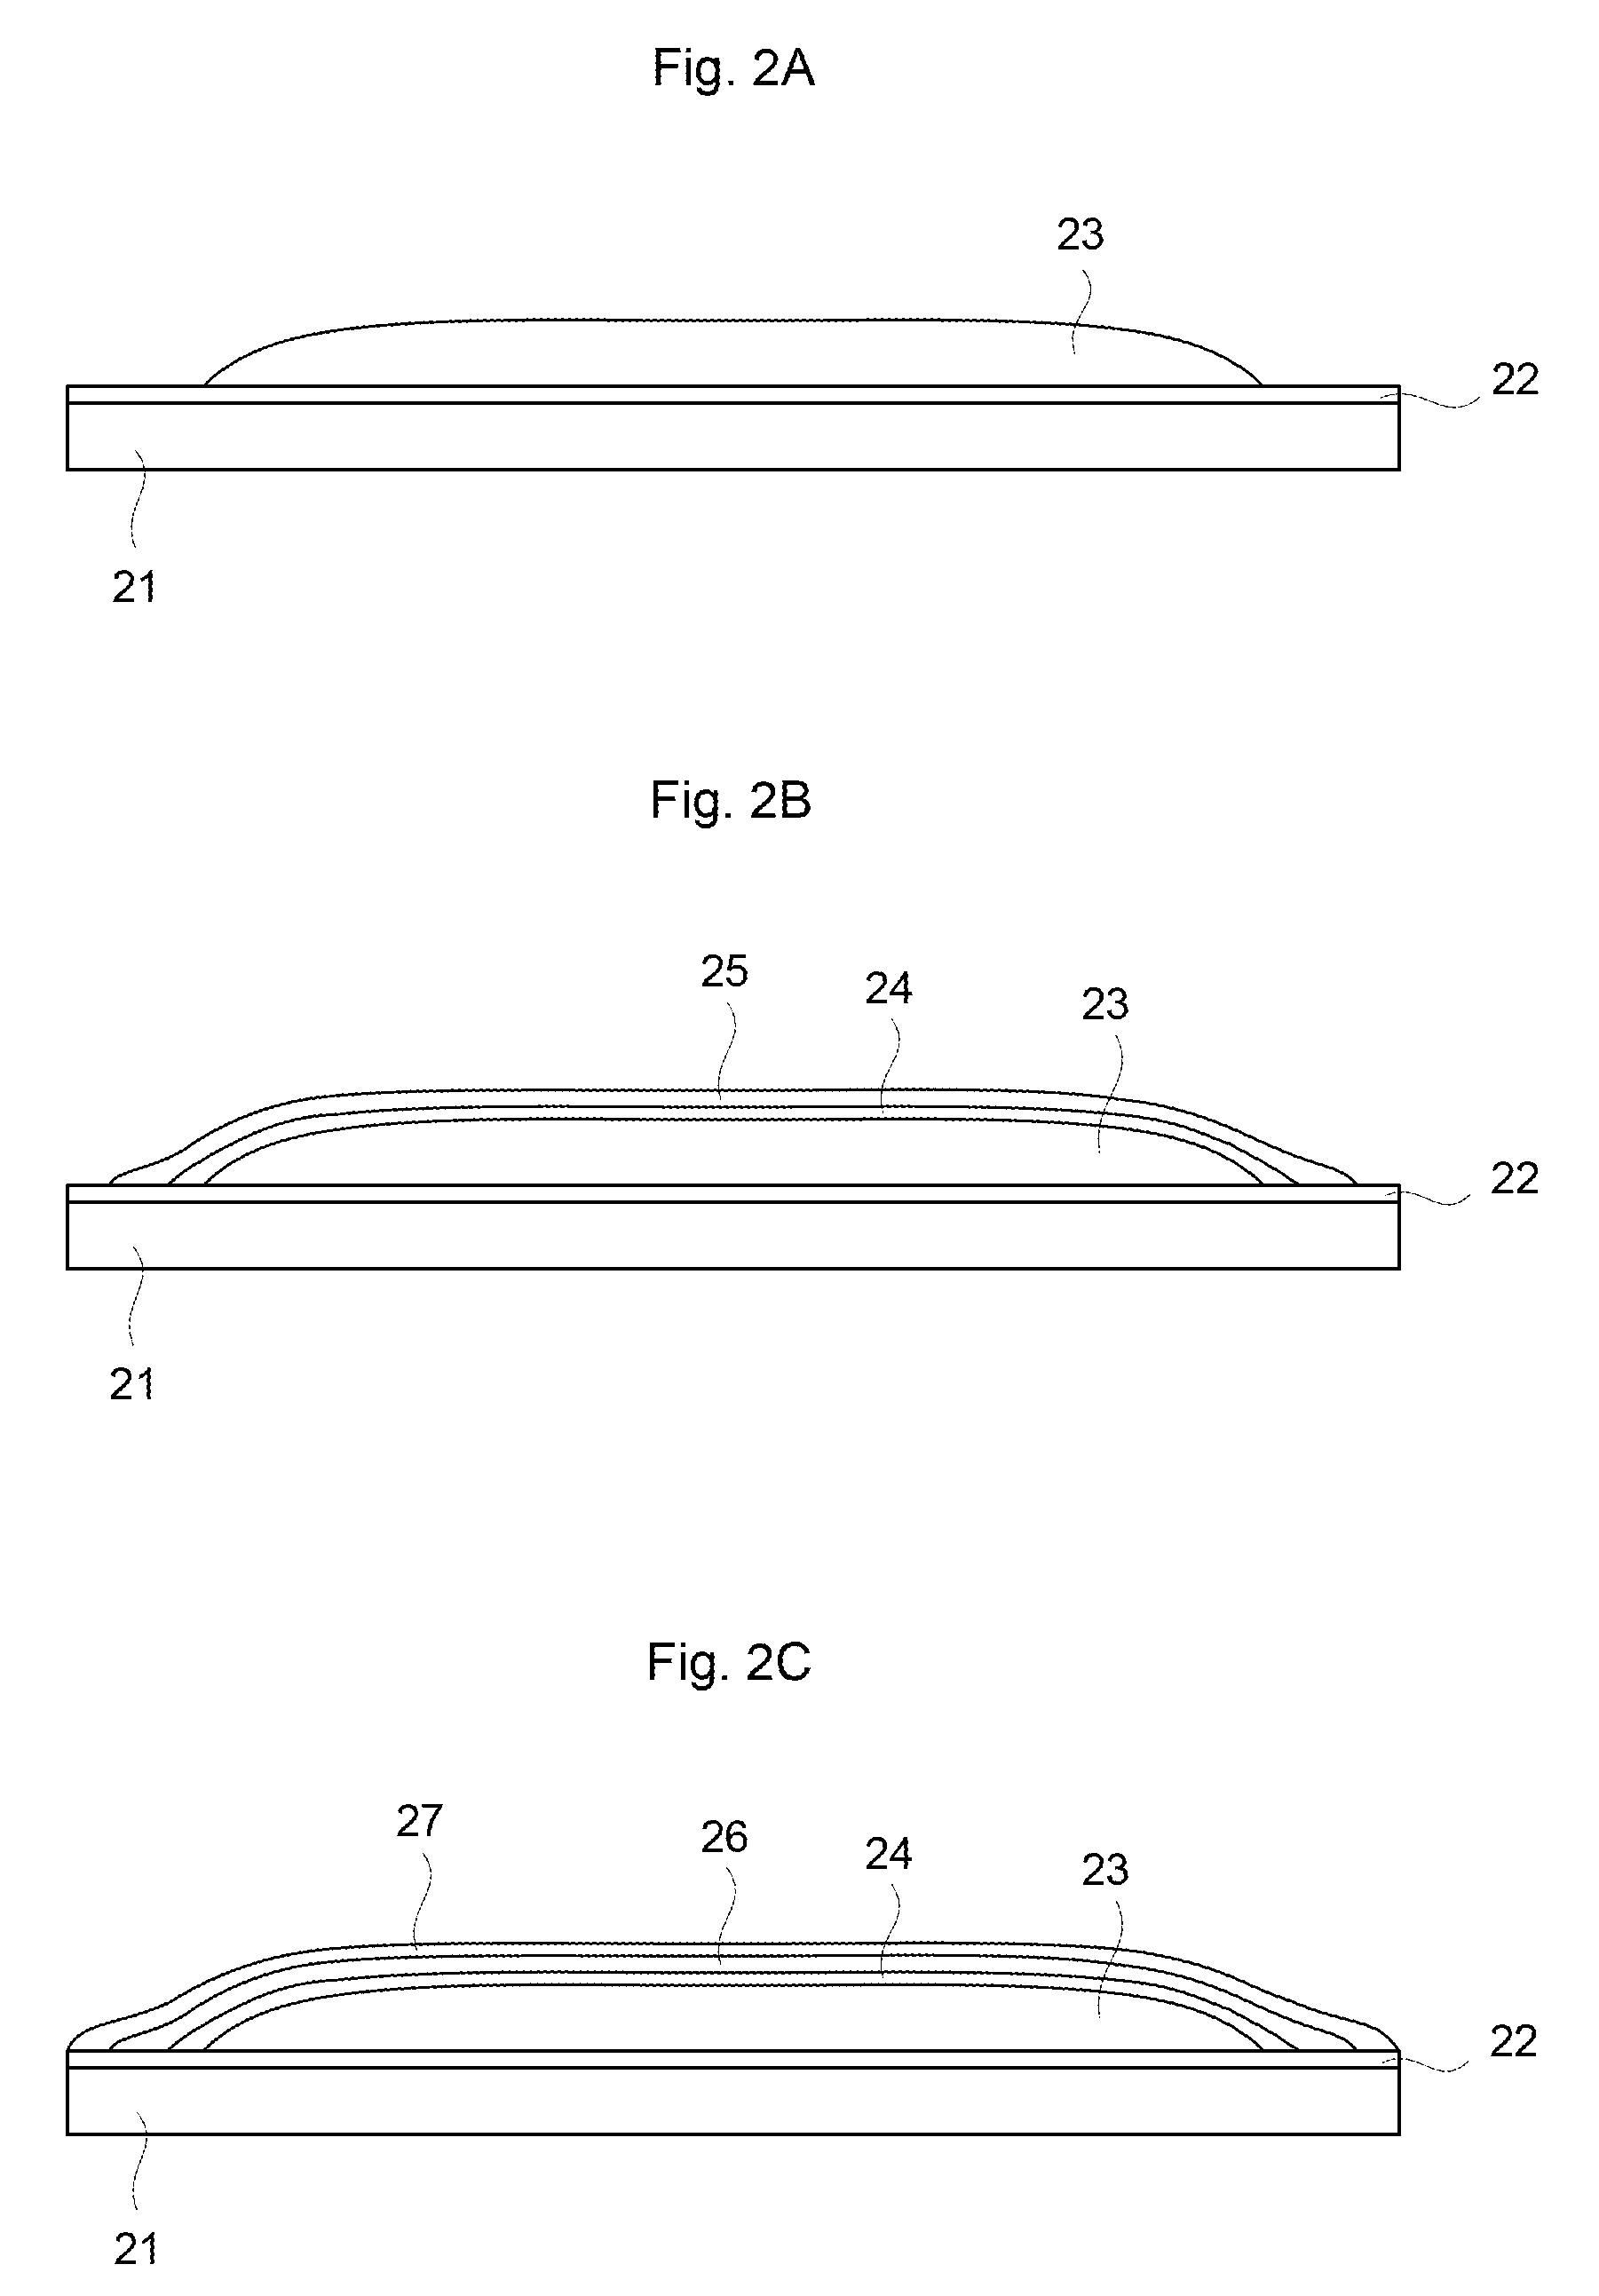 Aluminum Inks and Methods of Making the Same, Methods for Depositing Aluminum Inks, and Films Formed by Printing and/or Depositing an Aluminum Ink